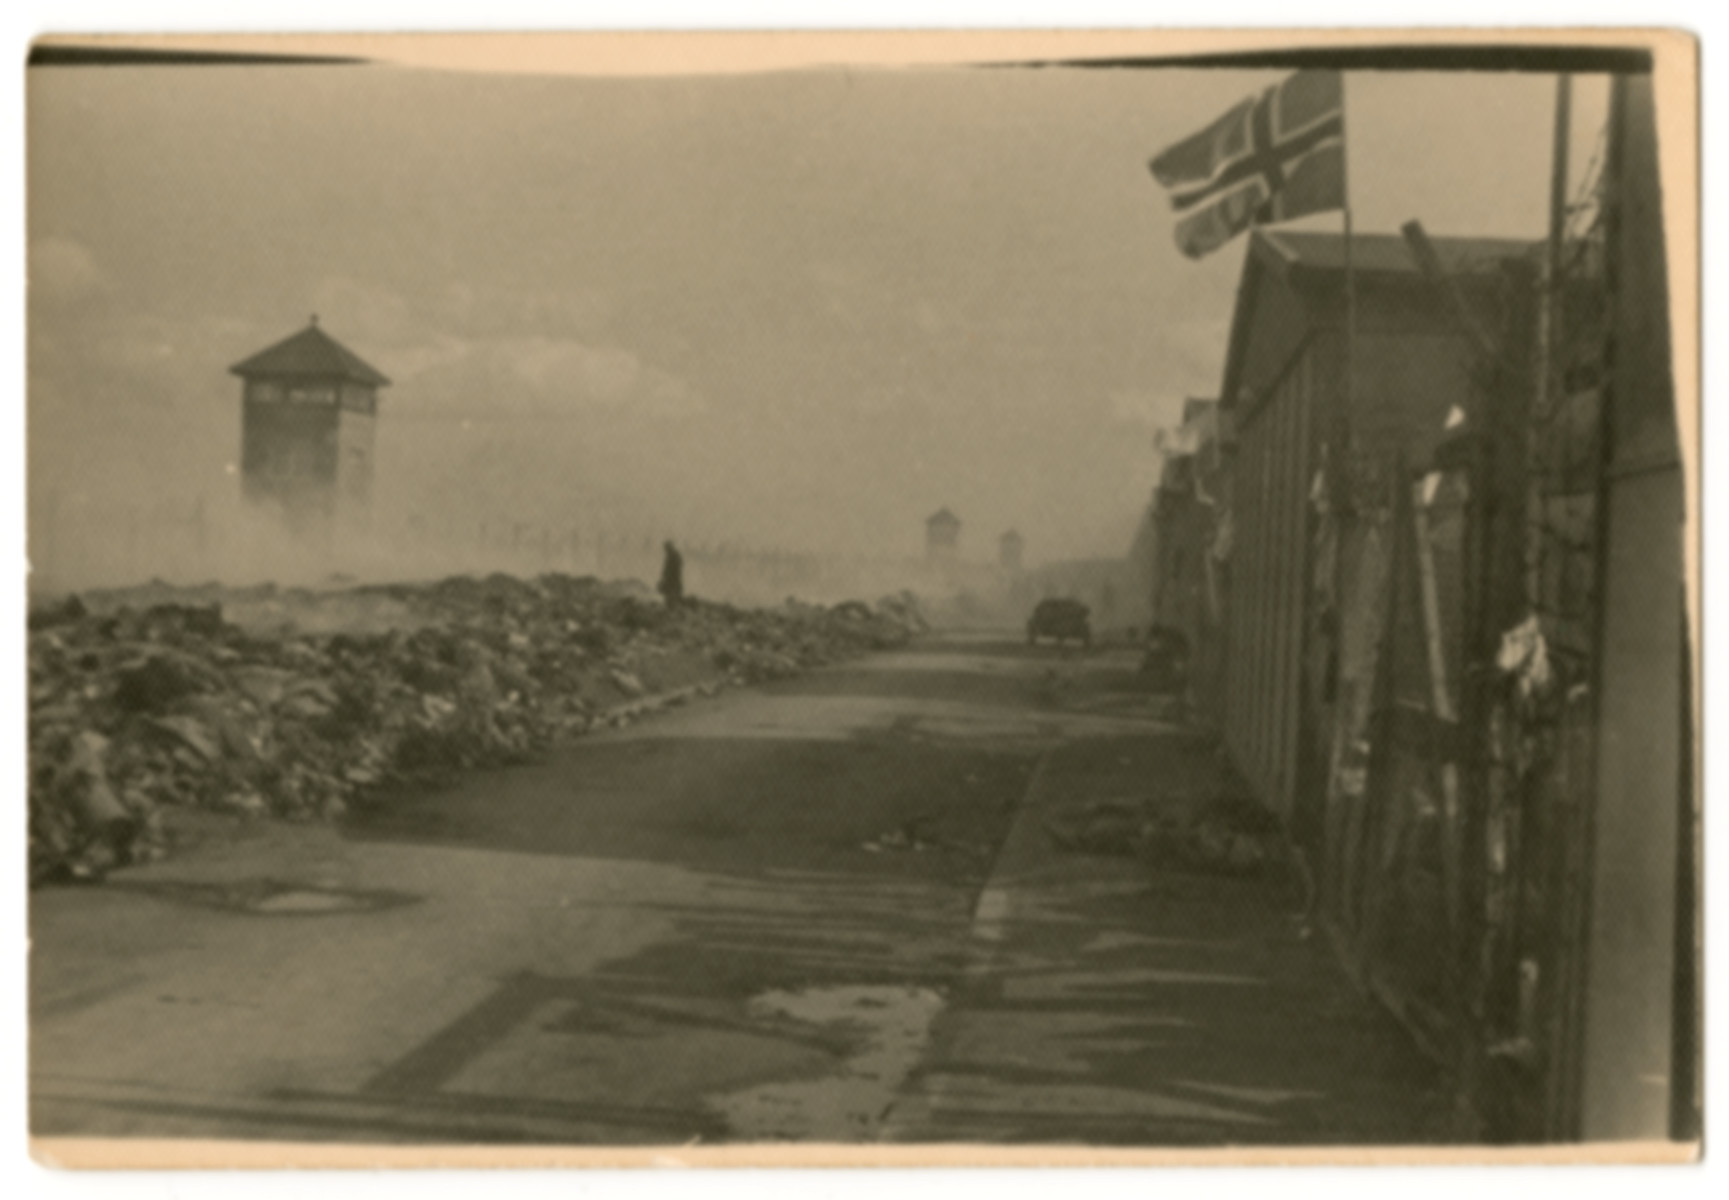 A Norwegian flag flys from a barrack in Dachau facing a mound of rubble and a watch tower.